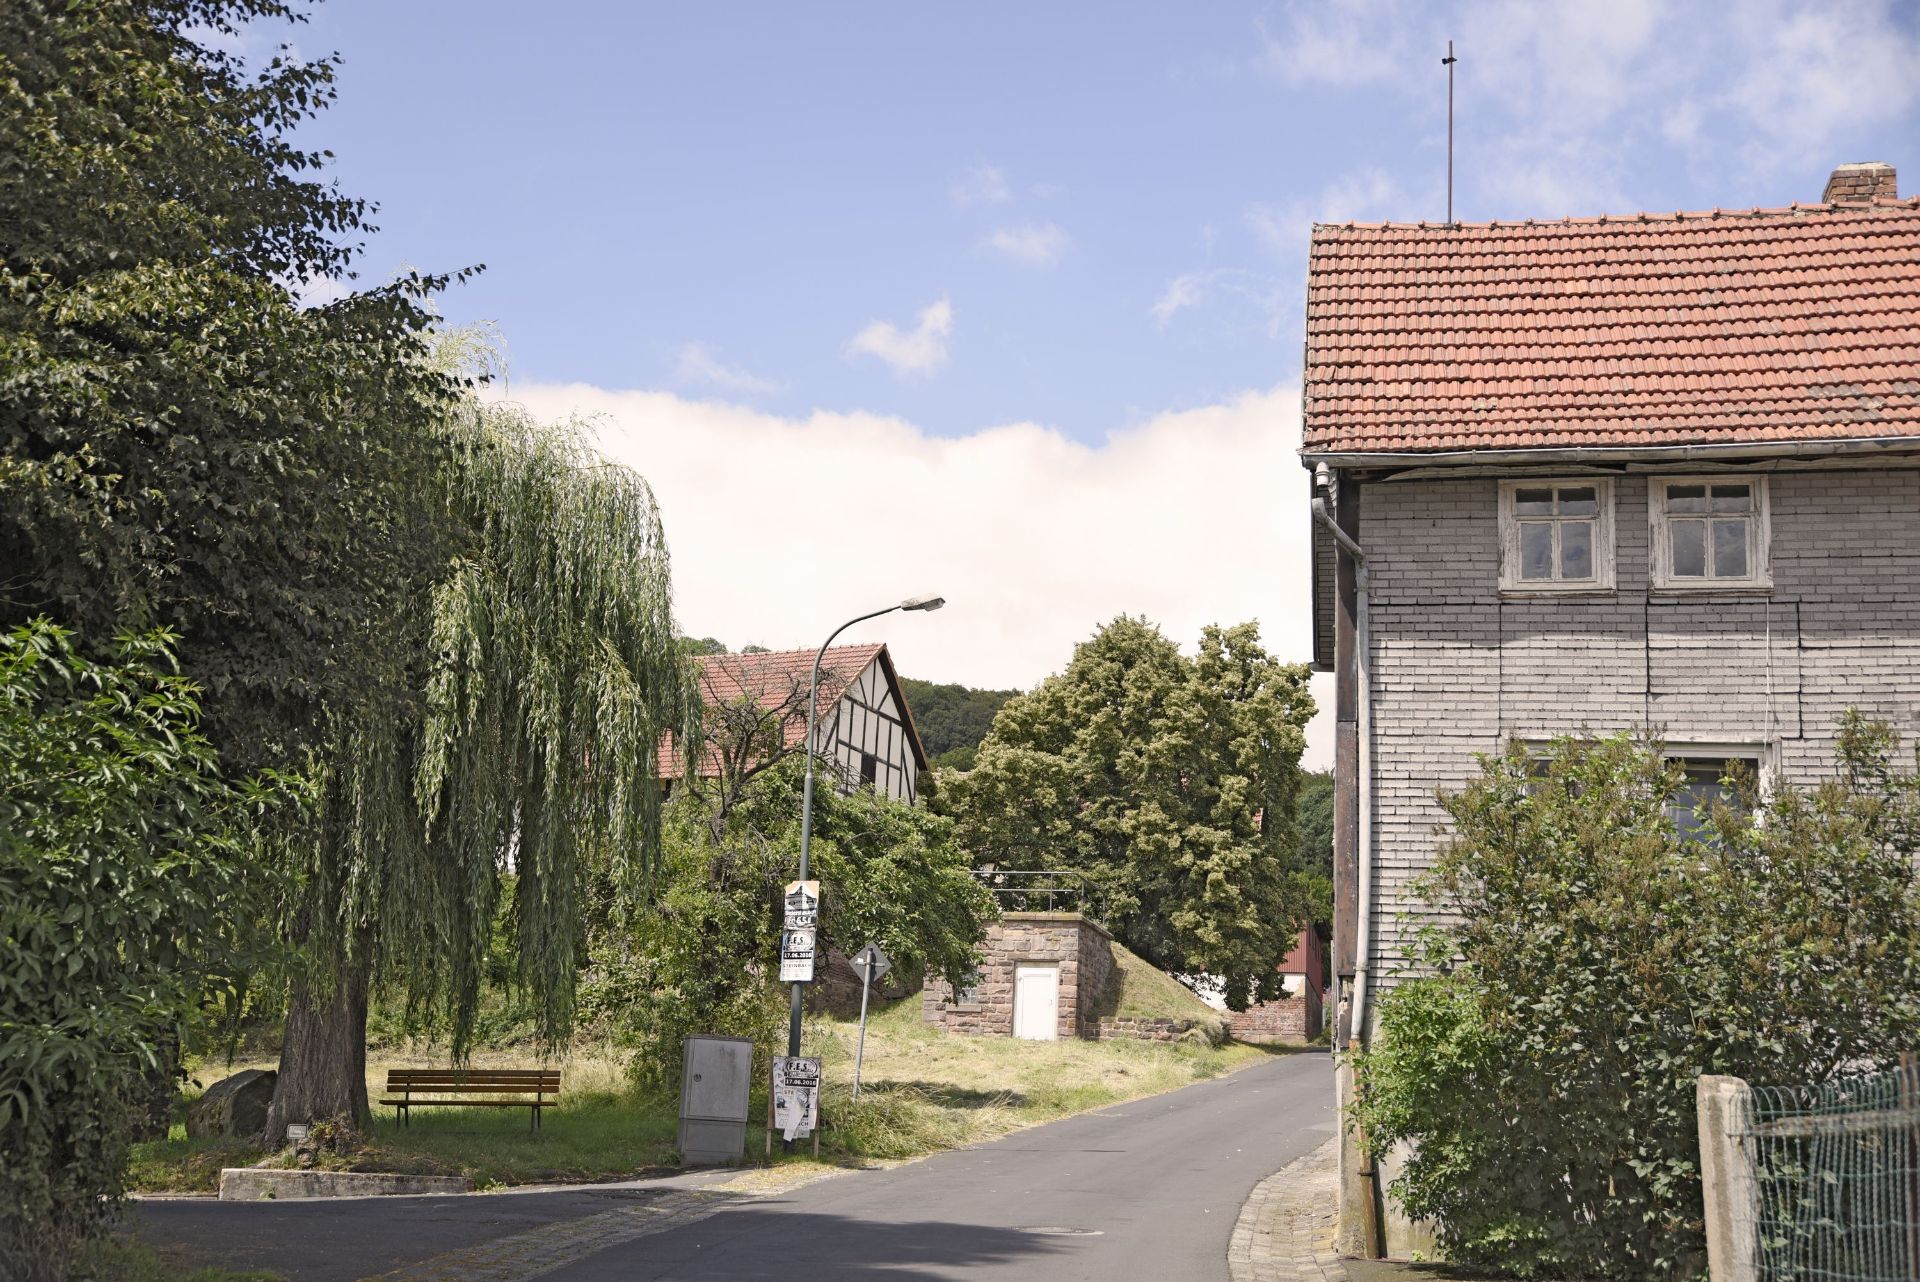 Freehold Property With 691 SQM Of Land In The Village Of Unterstoppel, Germany! - Image 17 of 60